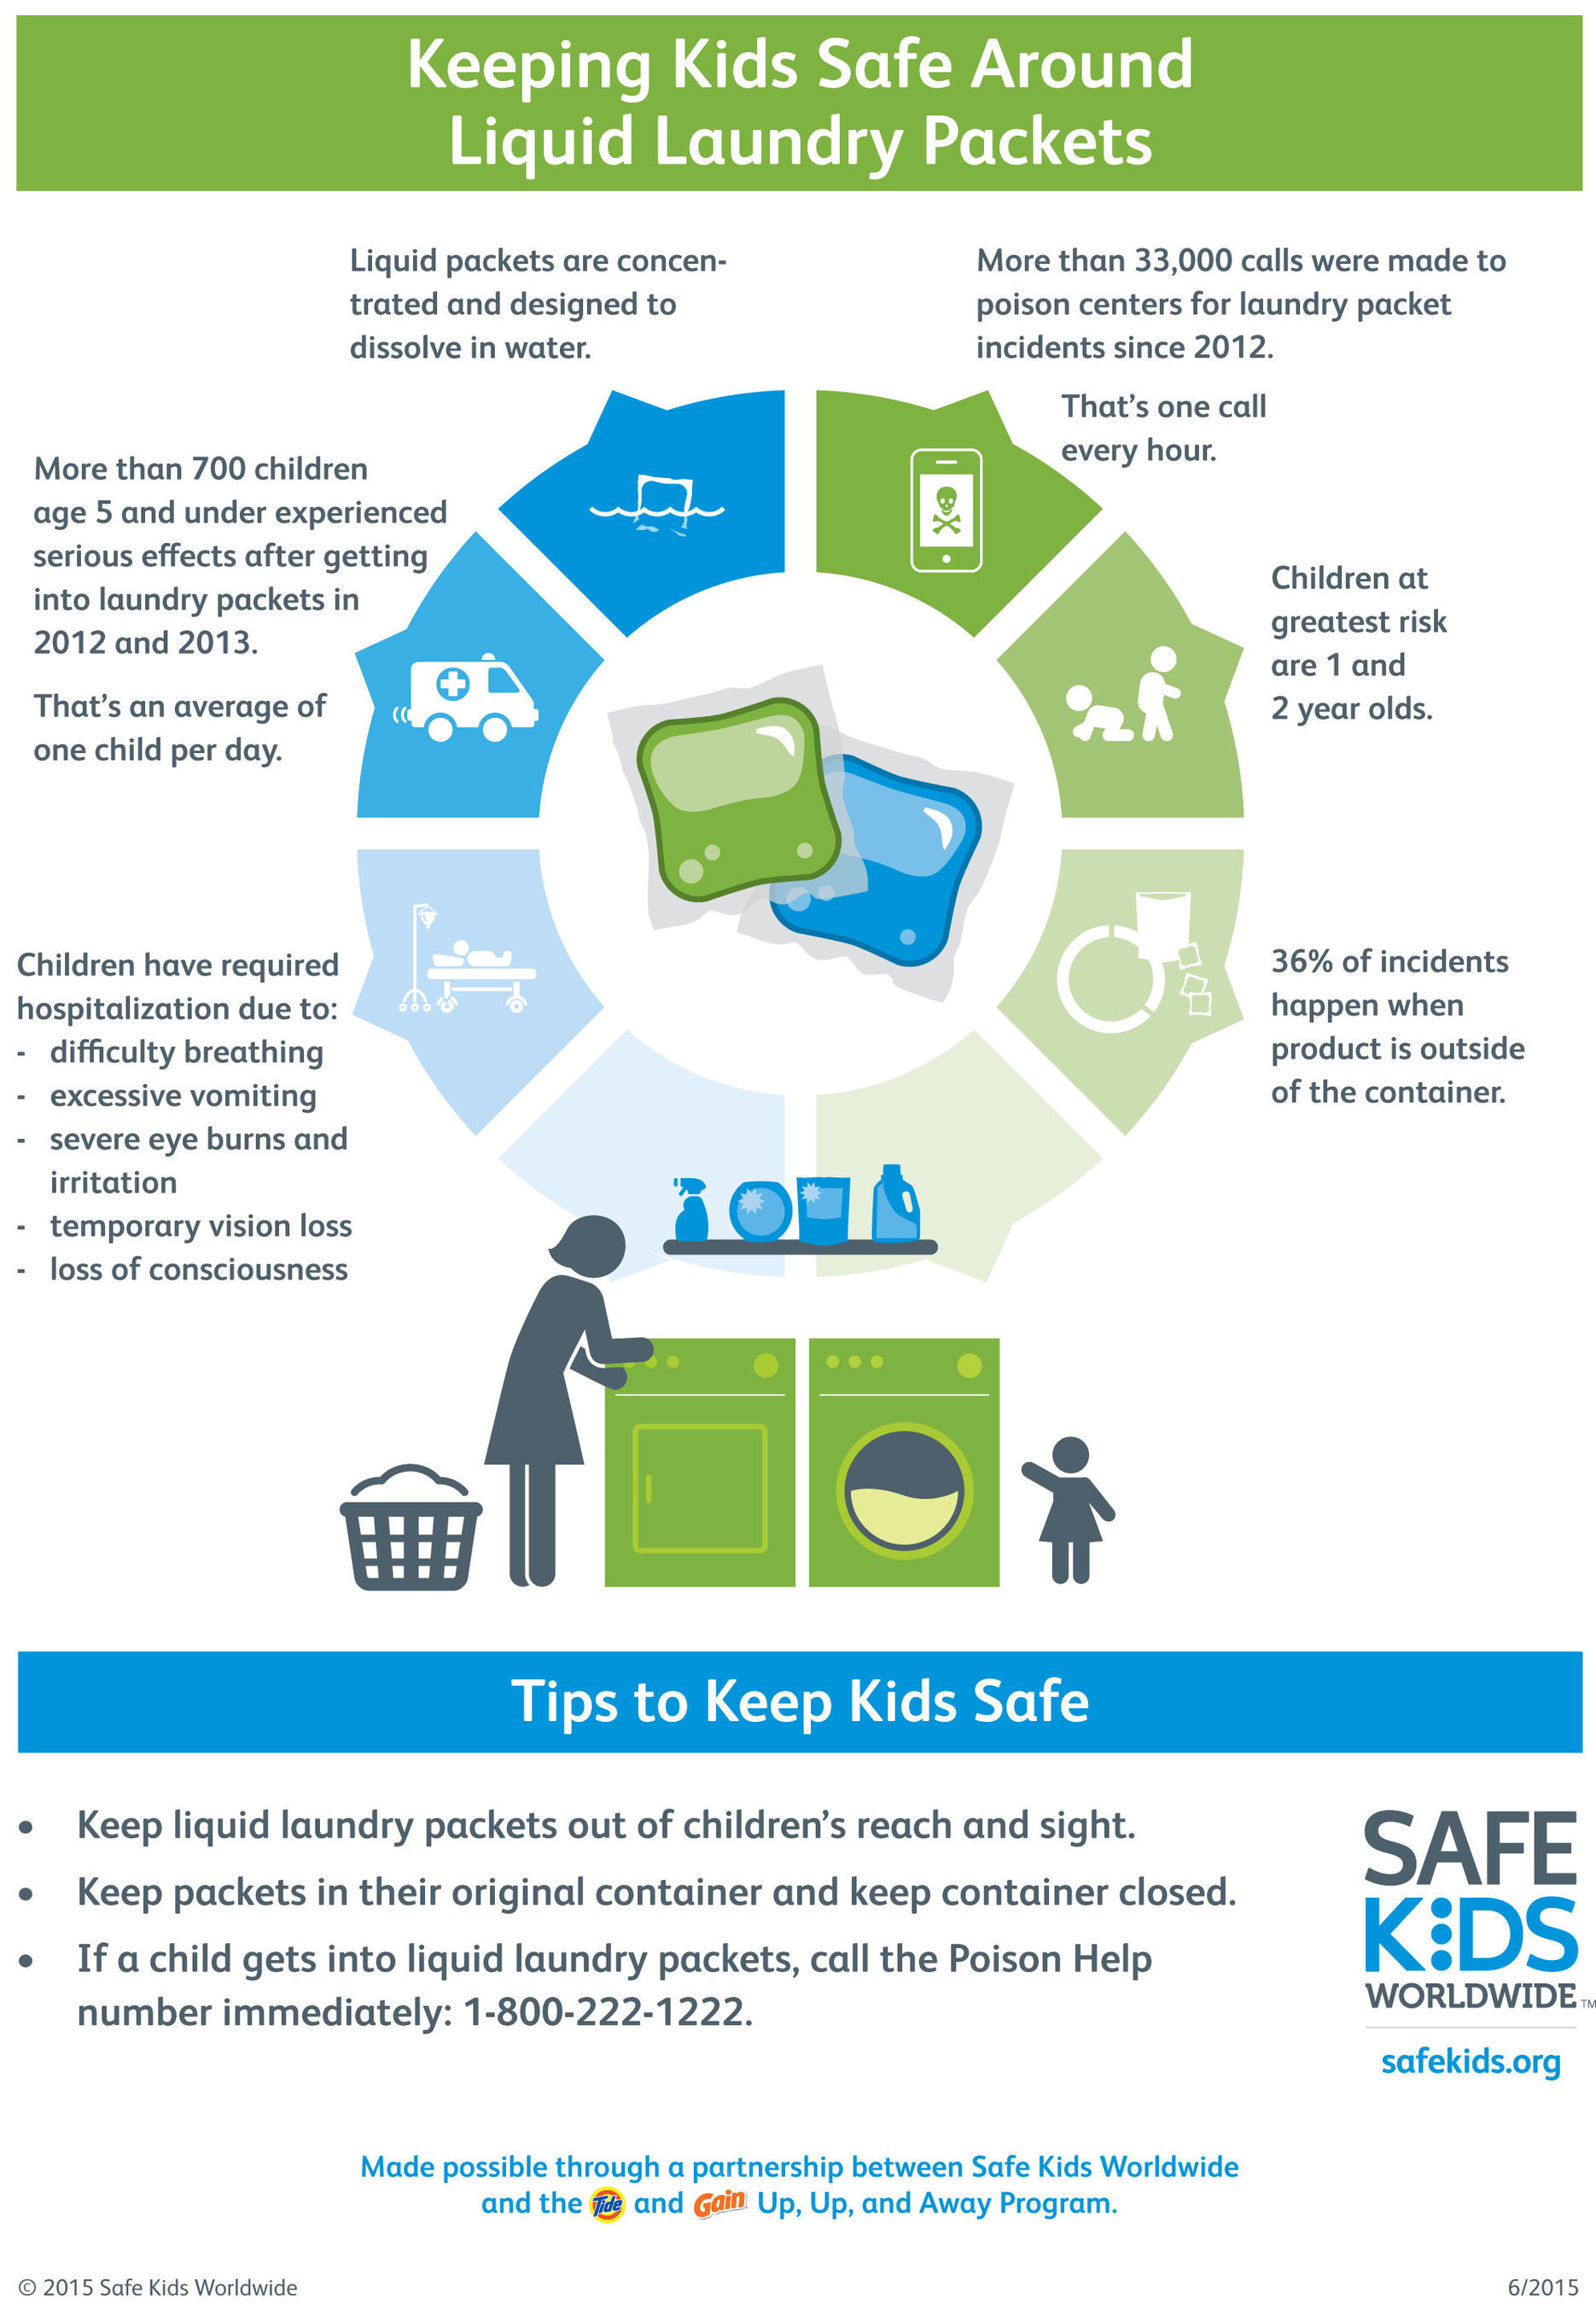 Liquid Laundry Packet Safety Infographic